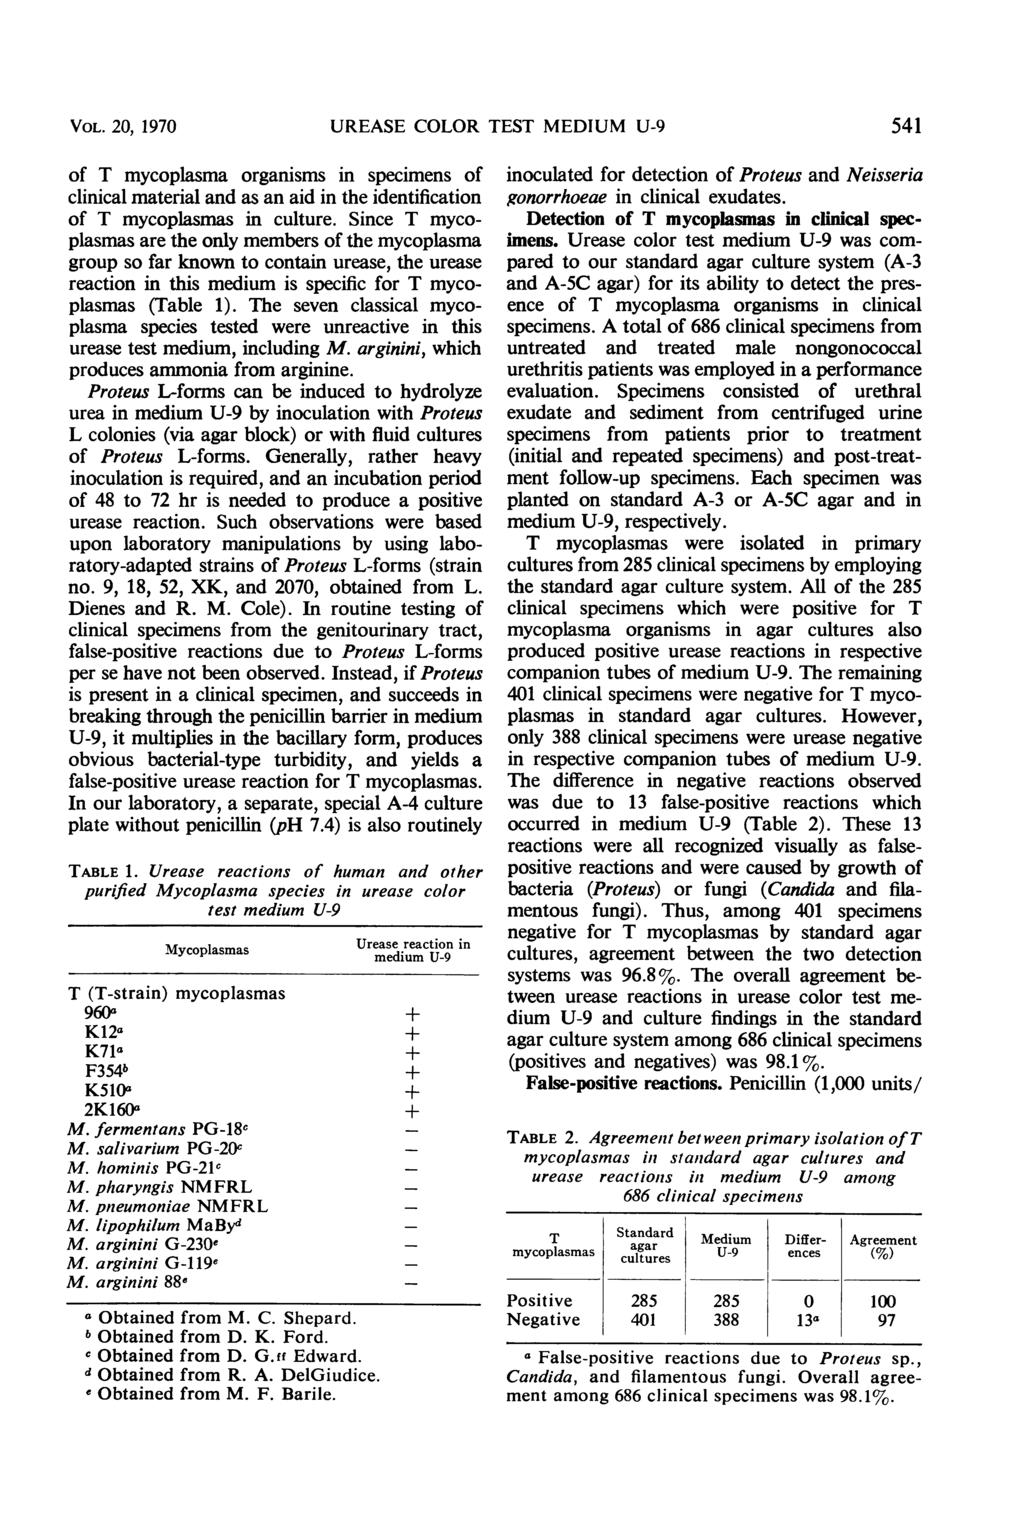 VOL. 20, 1970 UREASE COLOR TEST MEDIUM U-9 541 of T mycoplasma organisms in specimens of clinical material and as an aid in the identification of T mycoplasmas in culture.